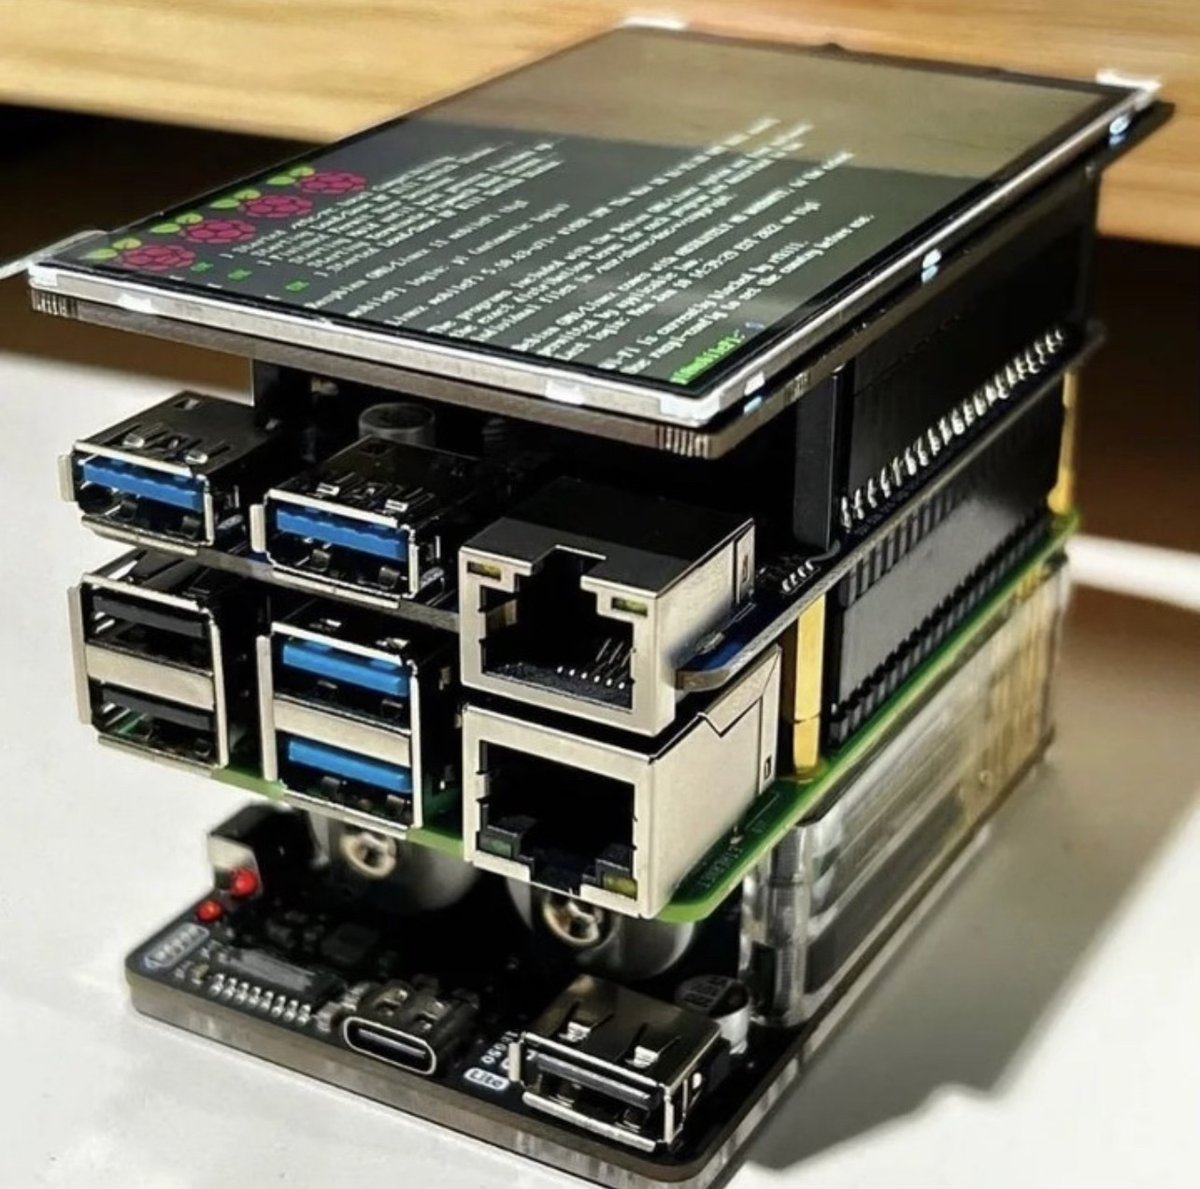 This Raspberry Pi 4 is the perfect setup!😍

@lalcaraz

Click the link in our bio!!!

#Vilros #RaspberryPi4 #TechEnthusiast #DIYProjects #EmbeddedSystems #CodingCommunity #MakerLife #TechGadgets #RaspberryPiProjects #Innovation